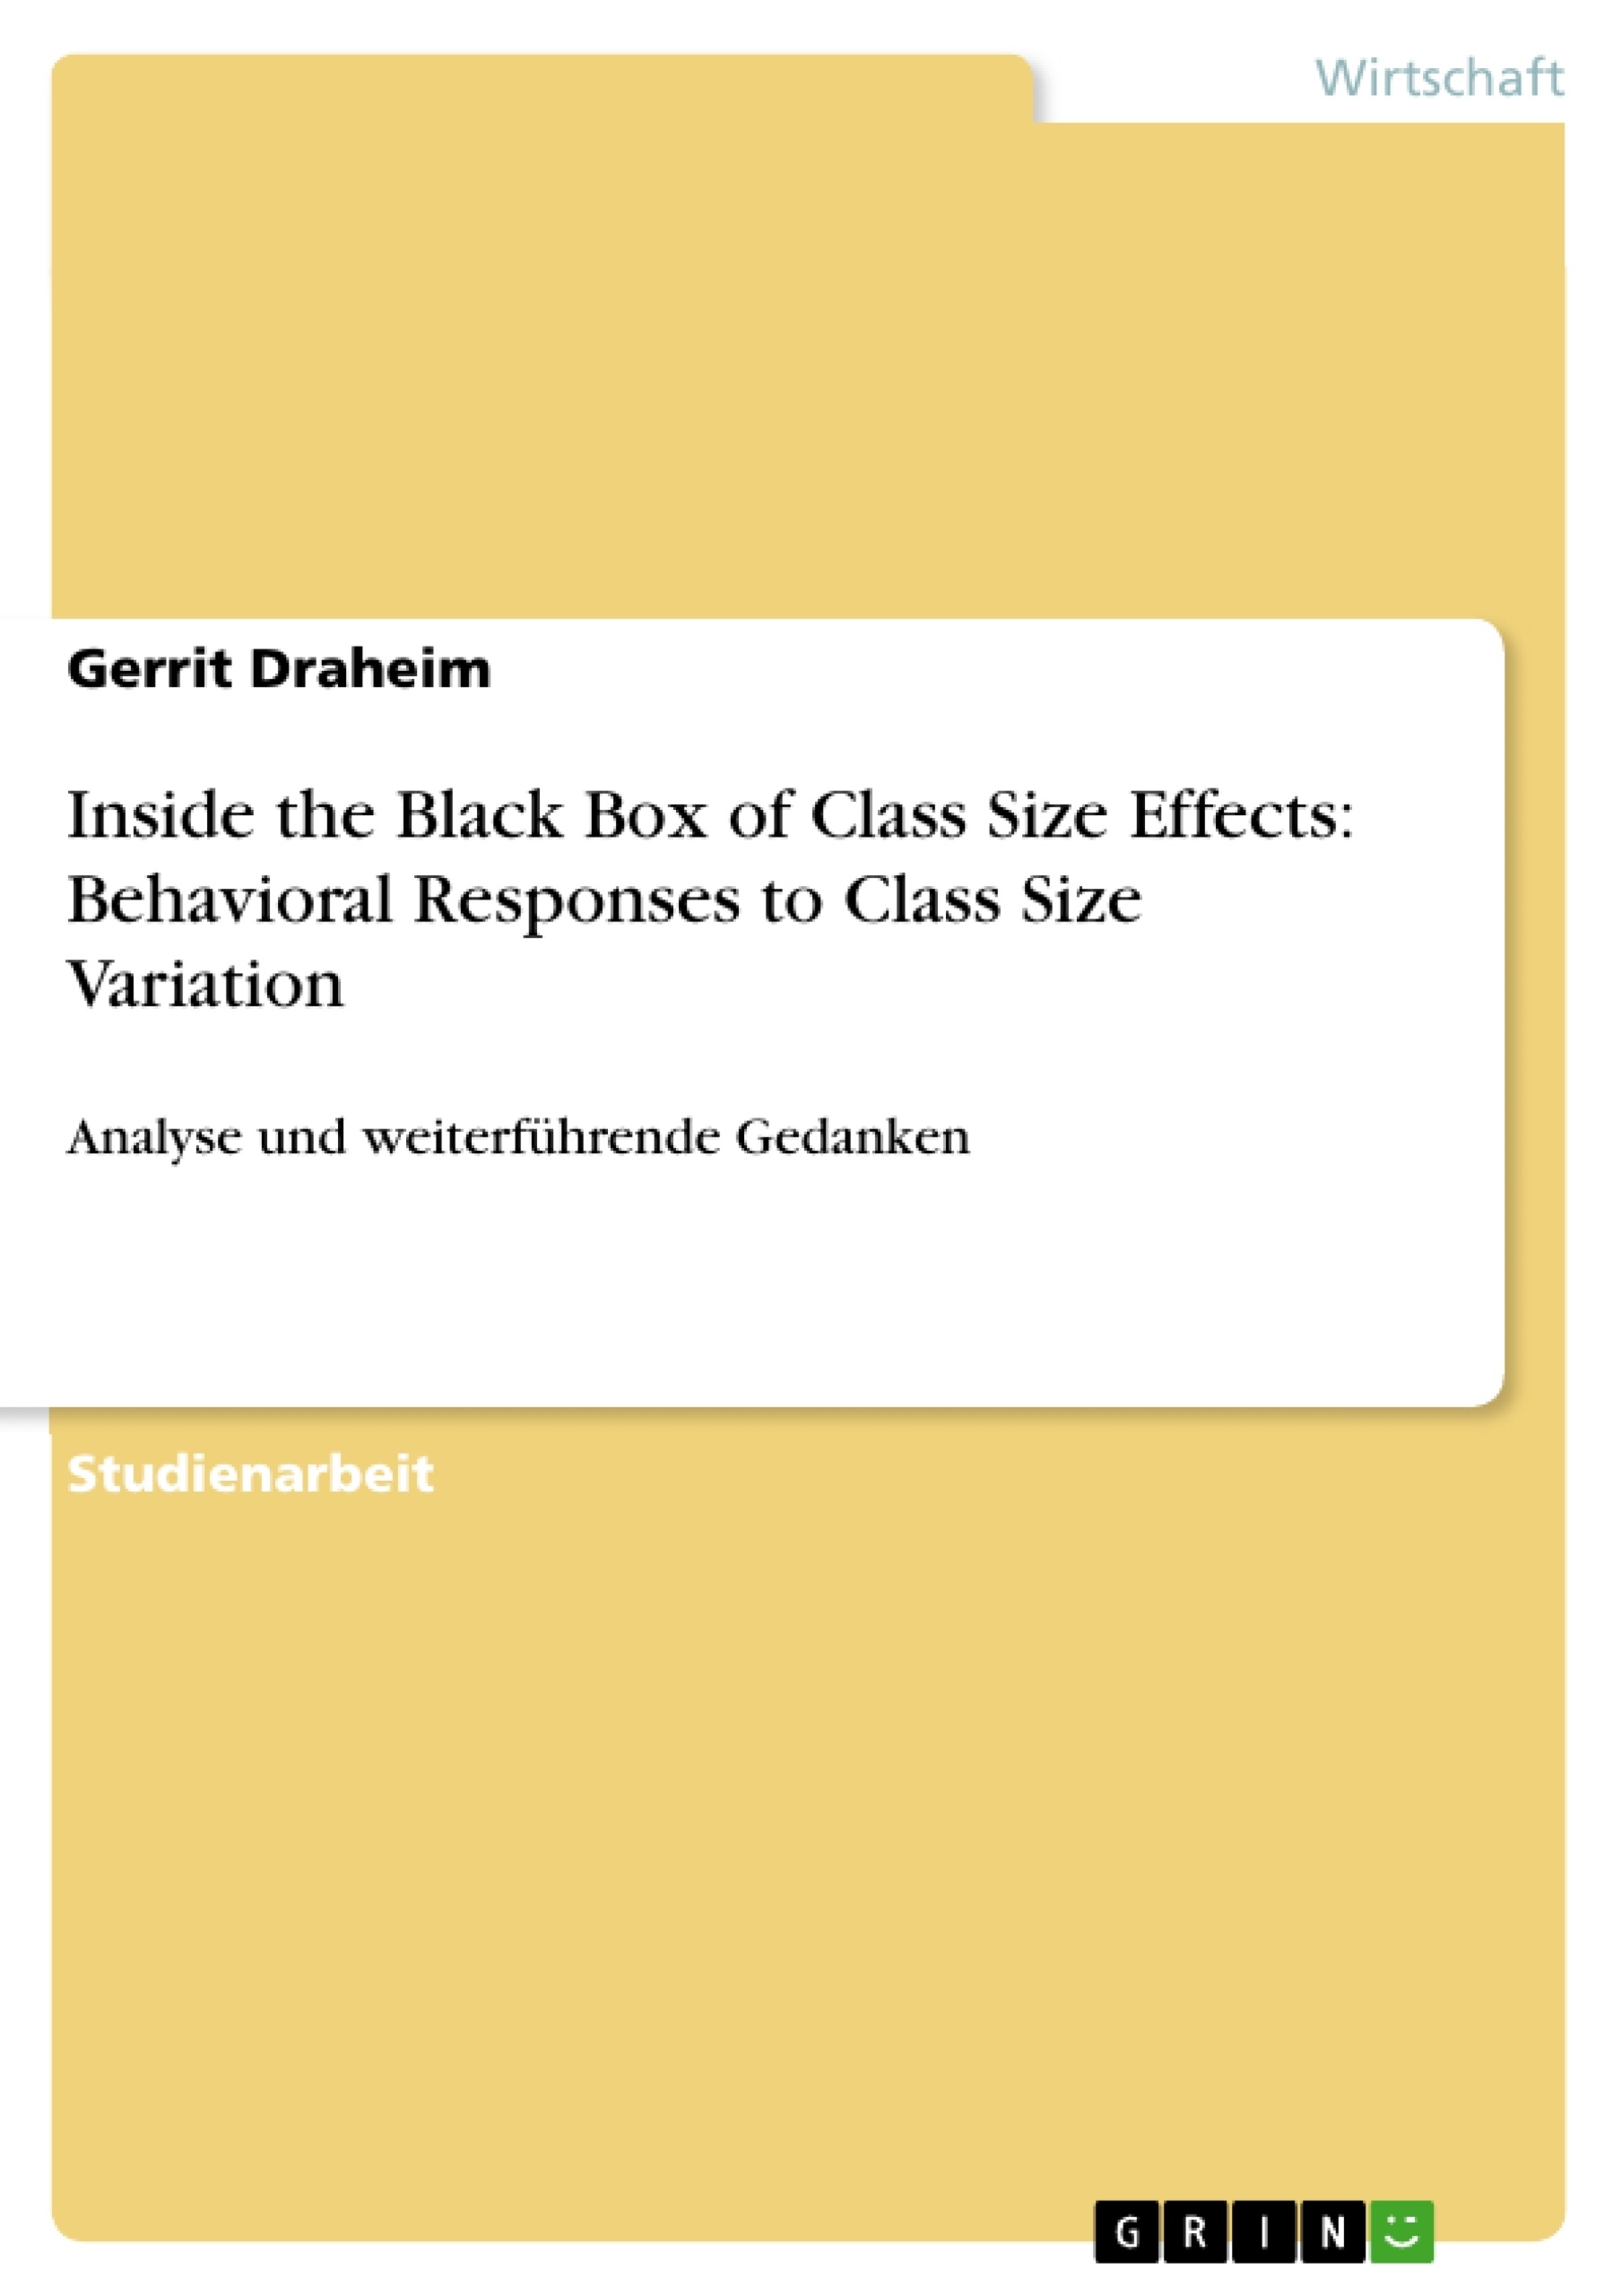 Titre: Inside the Black Box of Class Size Effects: Behavioral Responses to Class Size Variation